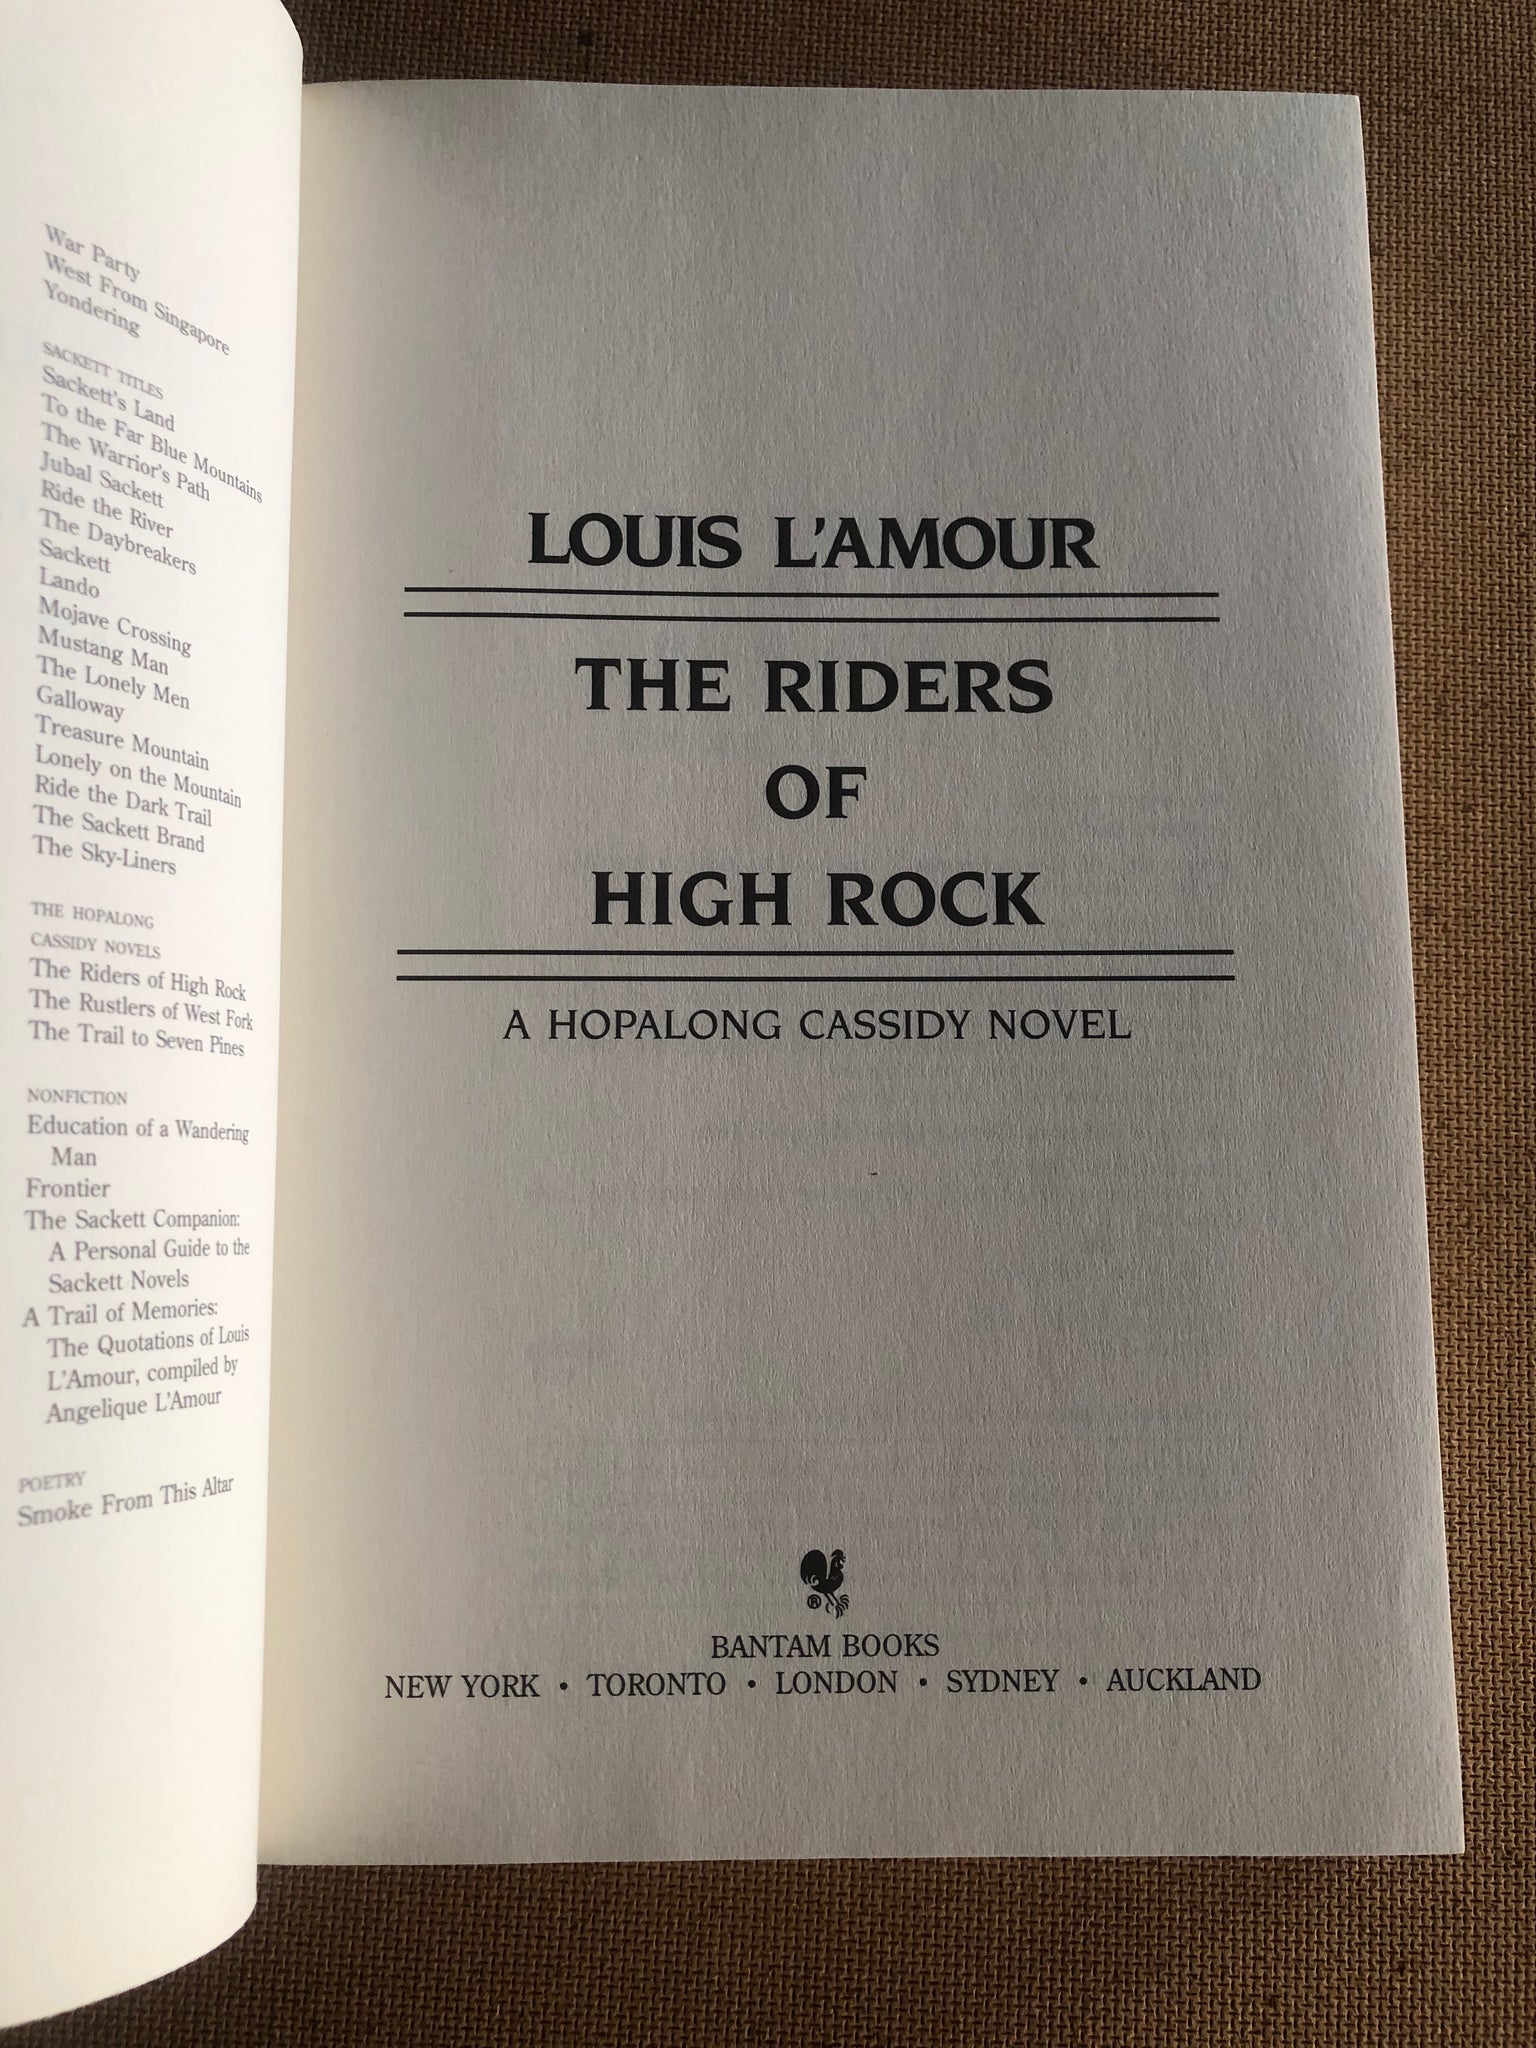 the sackett brand by louis l'amour